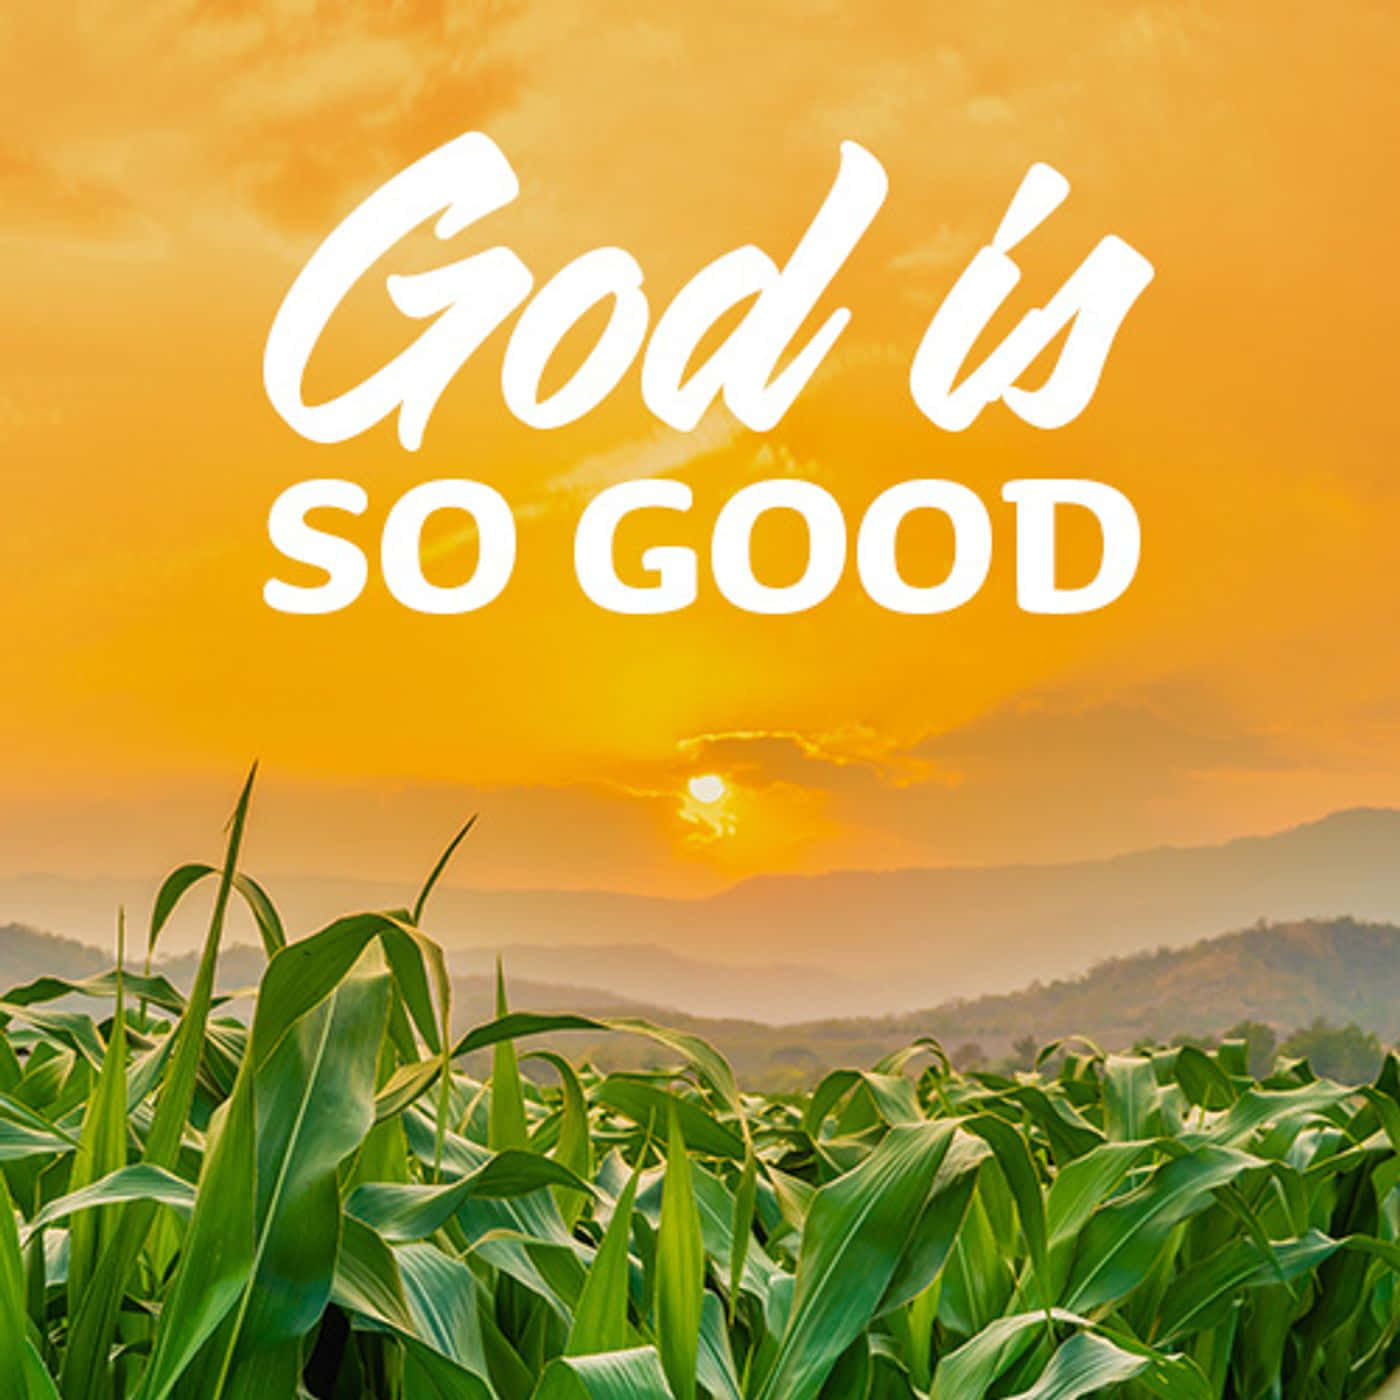 God Is Good With Cornfield During Sunset Wallpaper